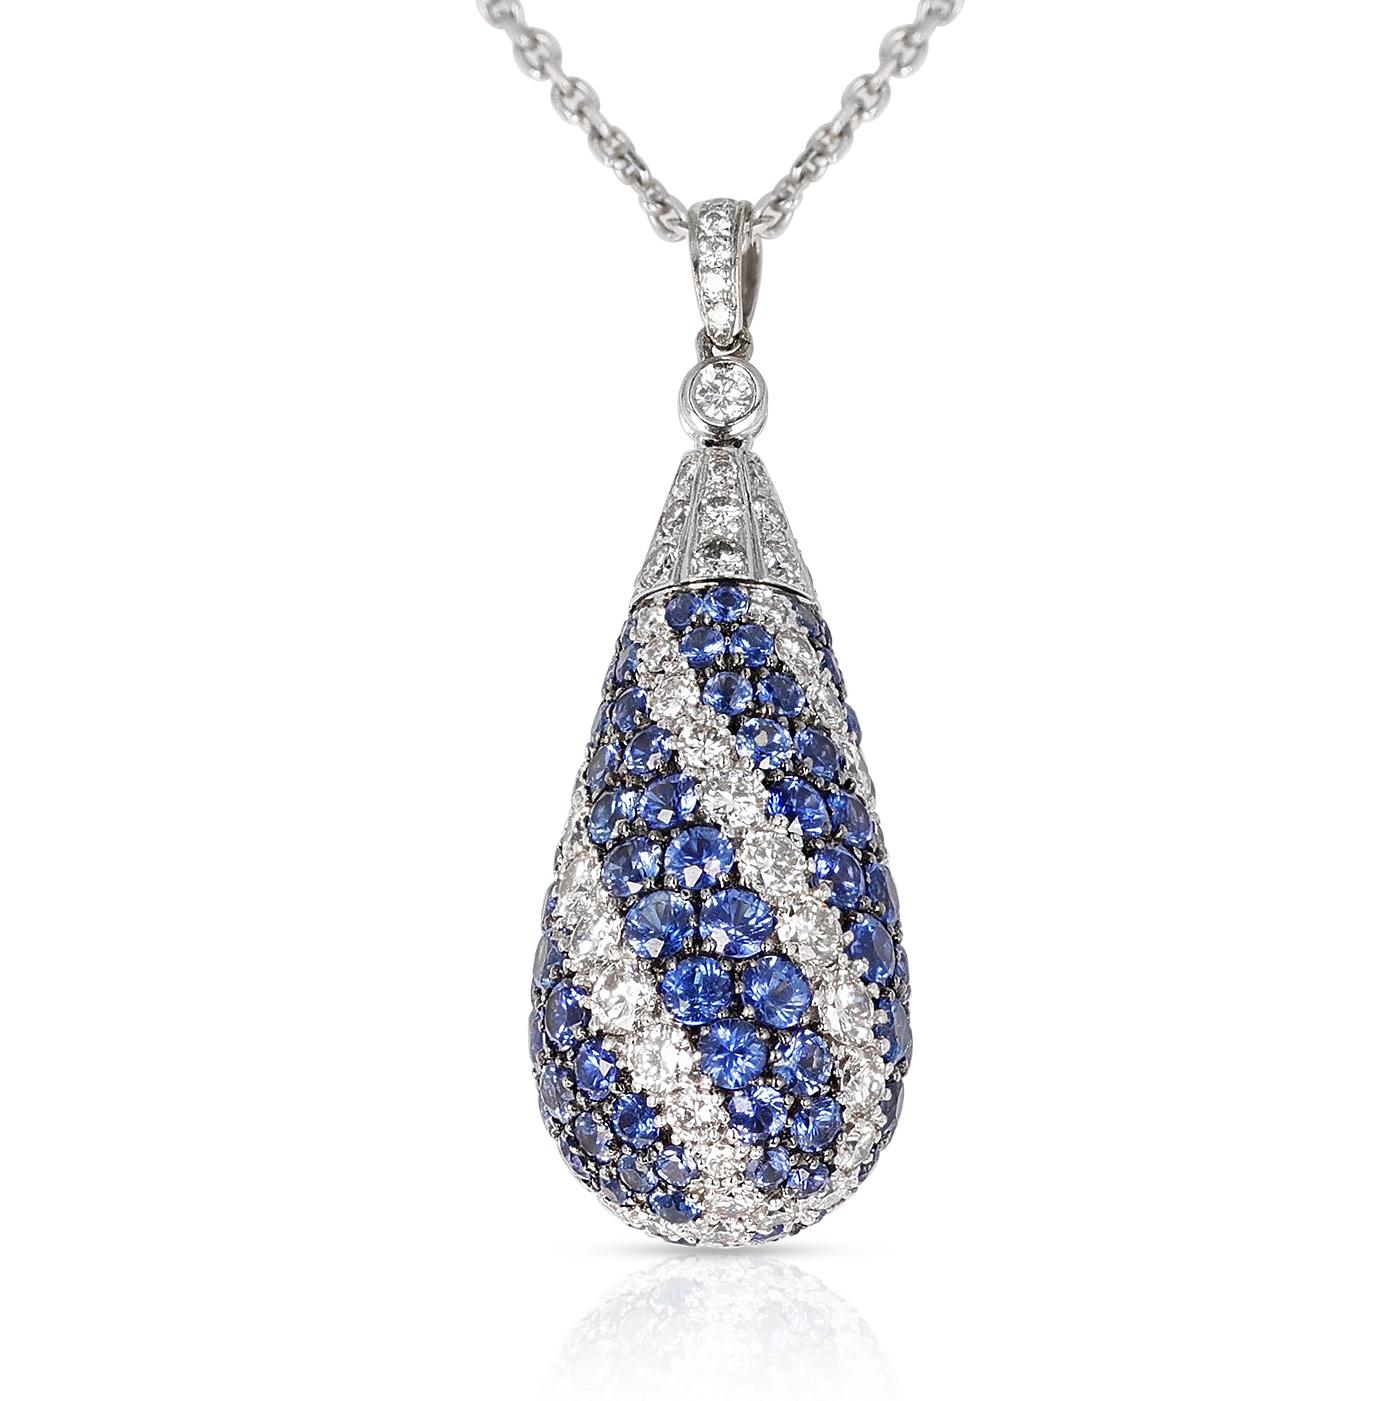 A beautiful Sapphire and Diamond Swirl Design Pendant Necklace made in 18k Gold with a chain. The total weight is 12.84 grams. The length of the pendant is 1.50.